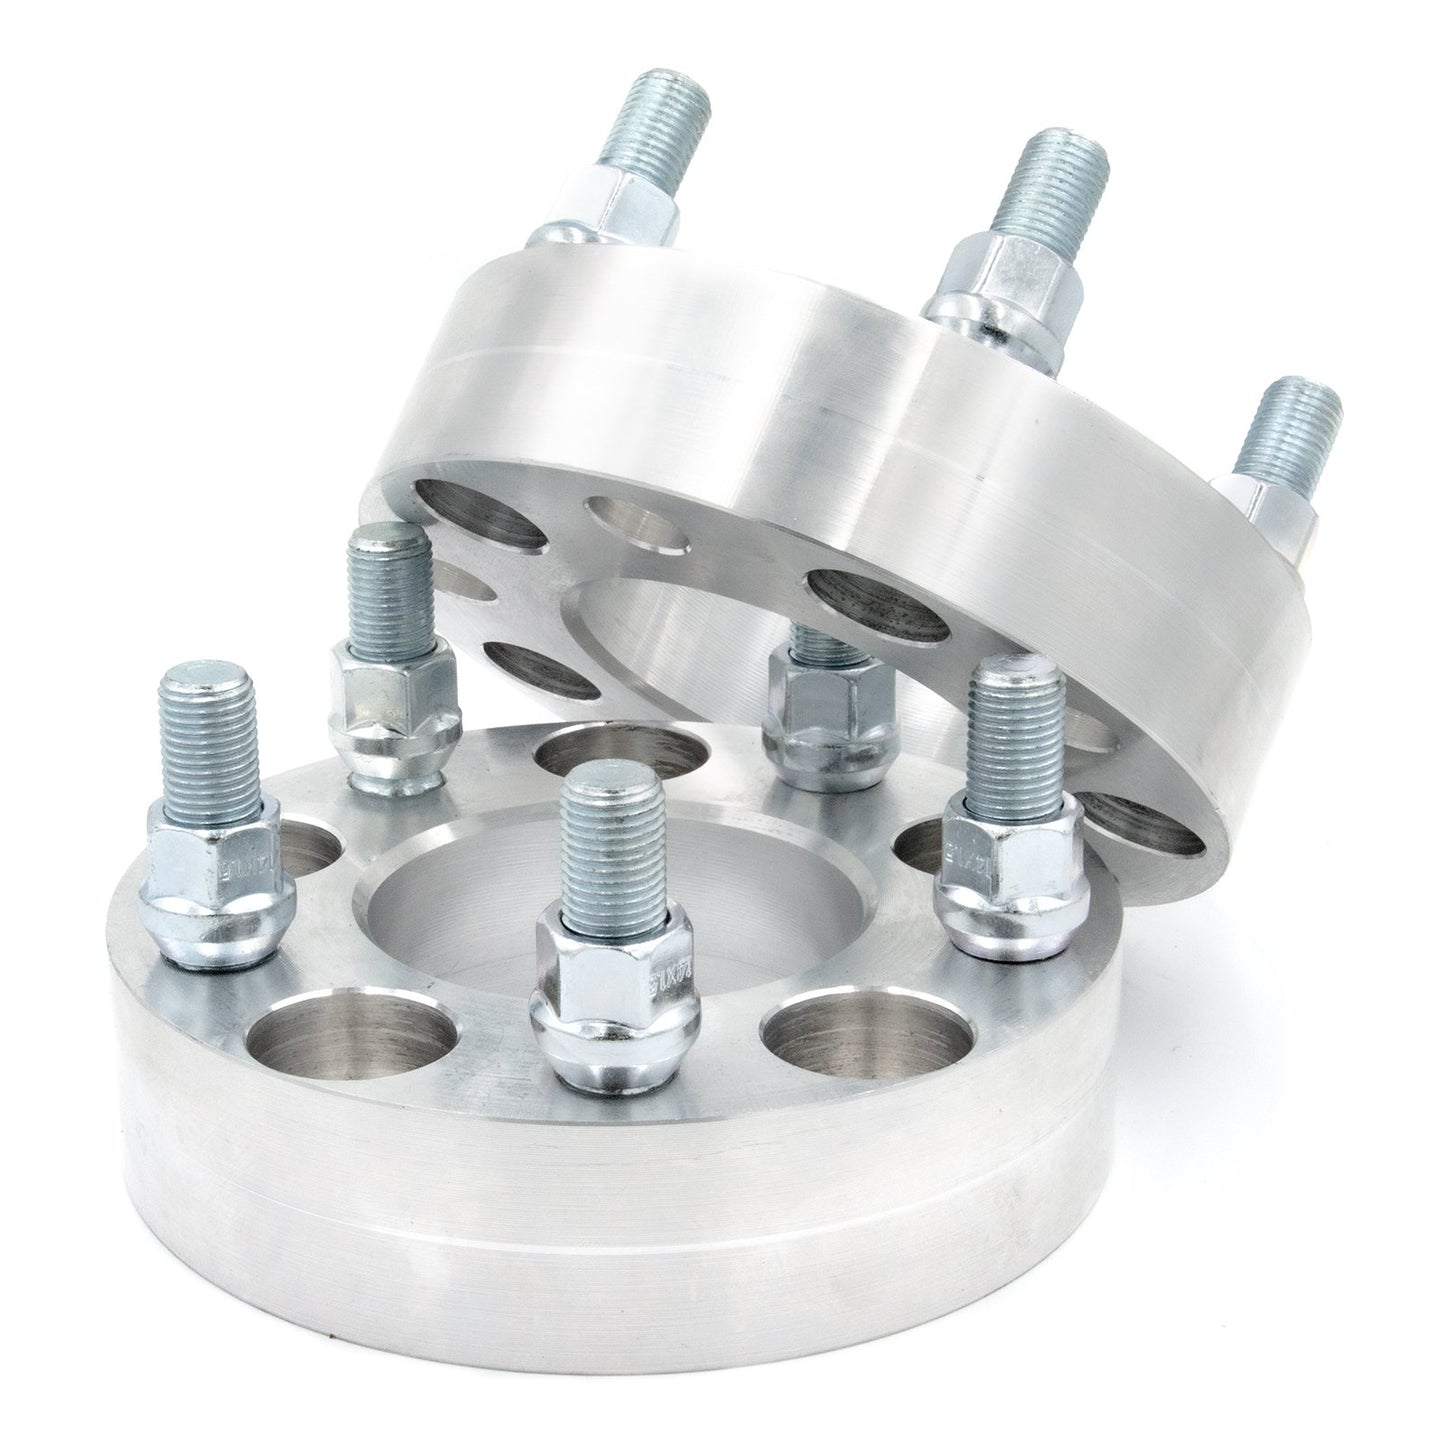 5x4.5" to 5x4.5" Wheel Spacer/Adapter - Thickness: 3/4"- 4"